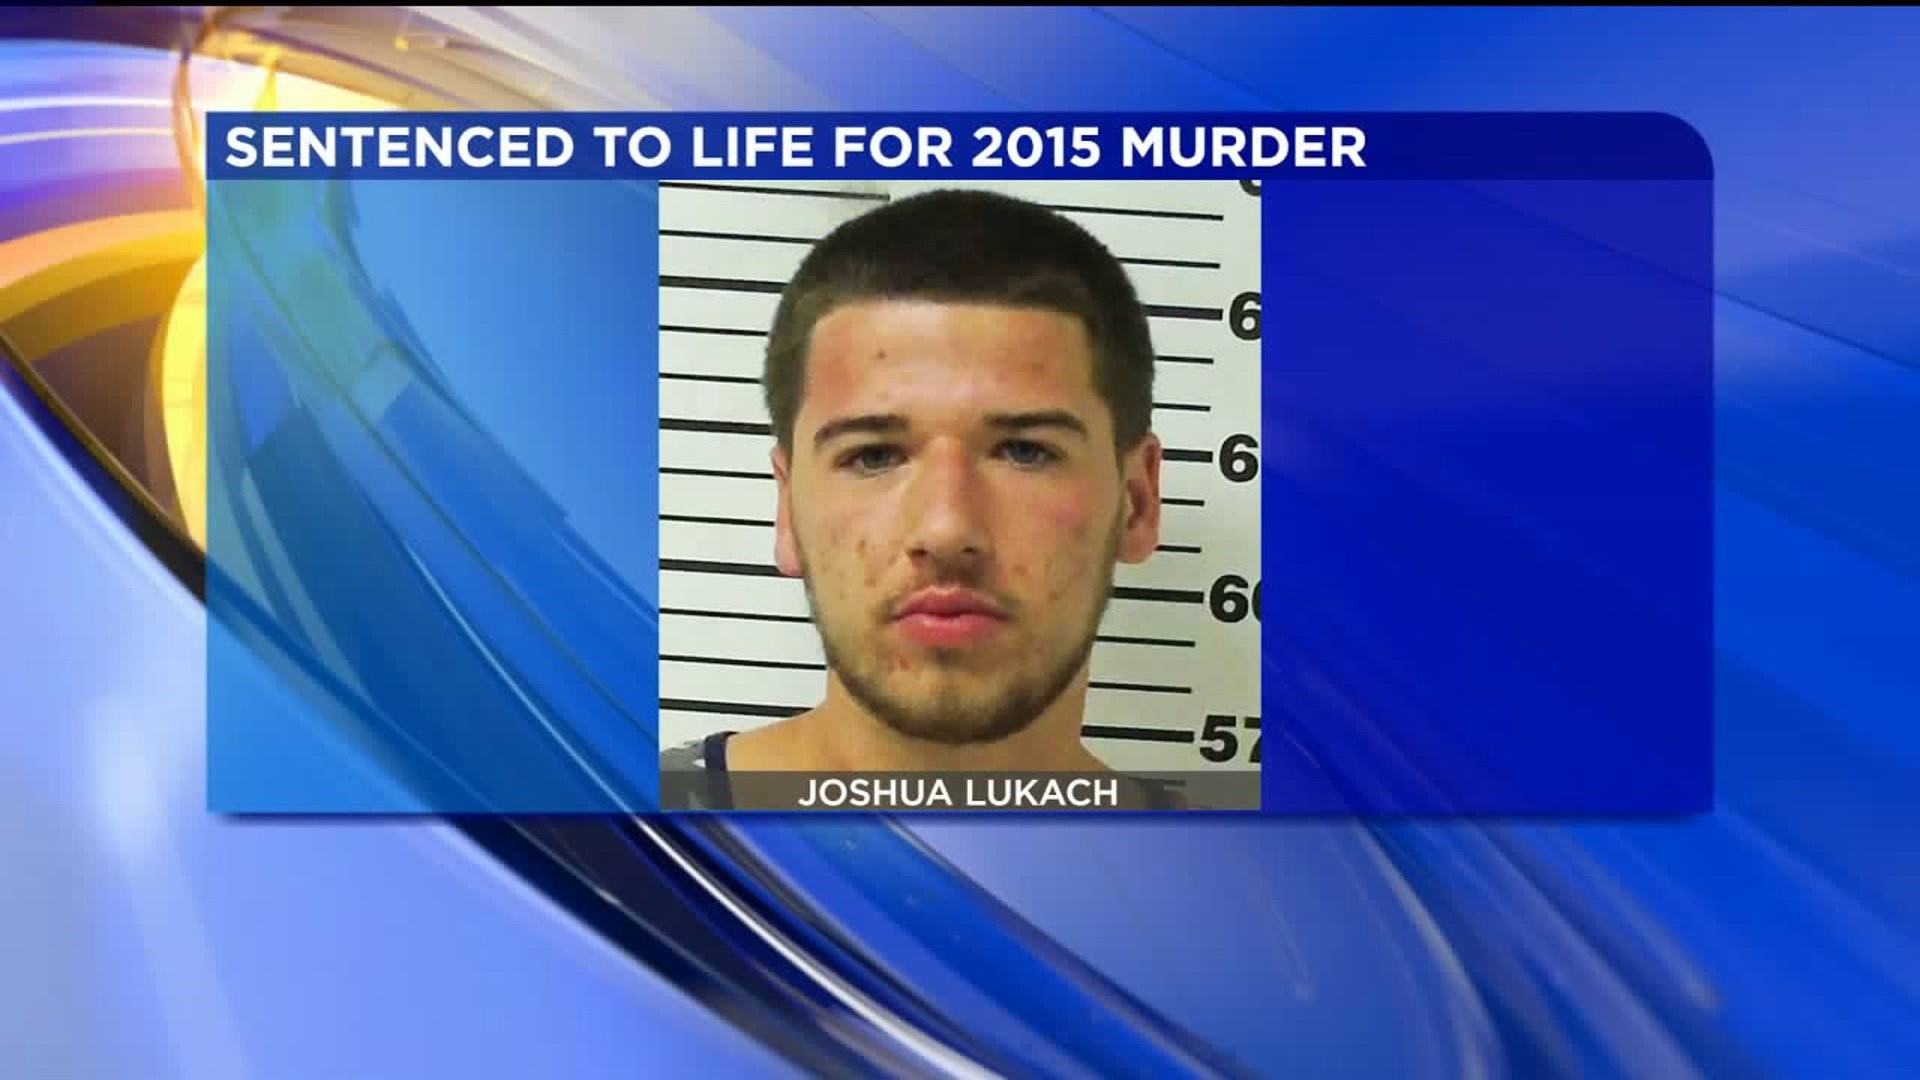 Convicted Killer Sentenced to Life in Prison